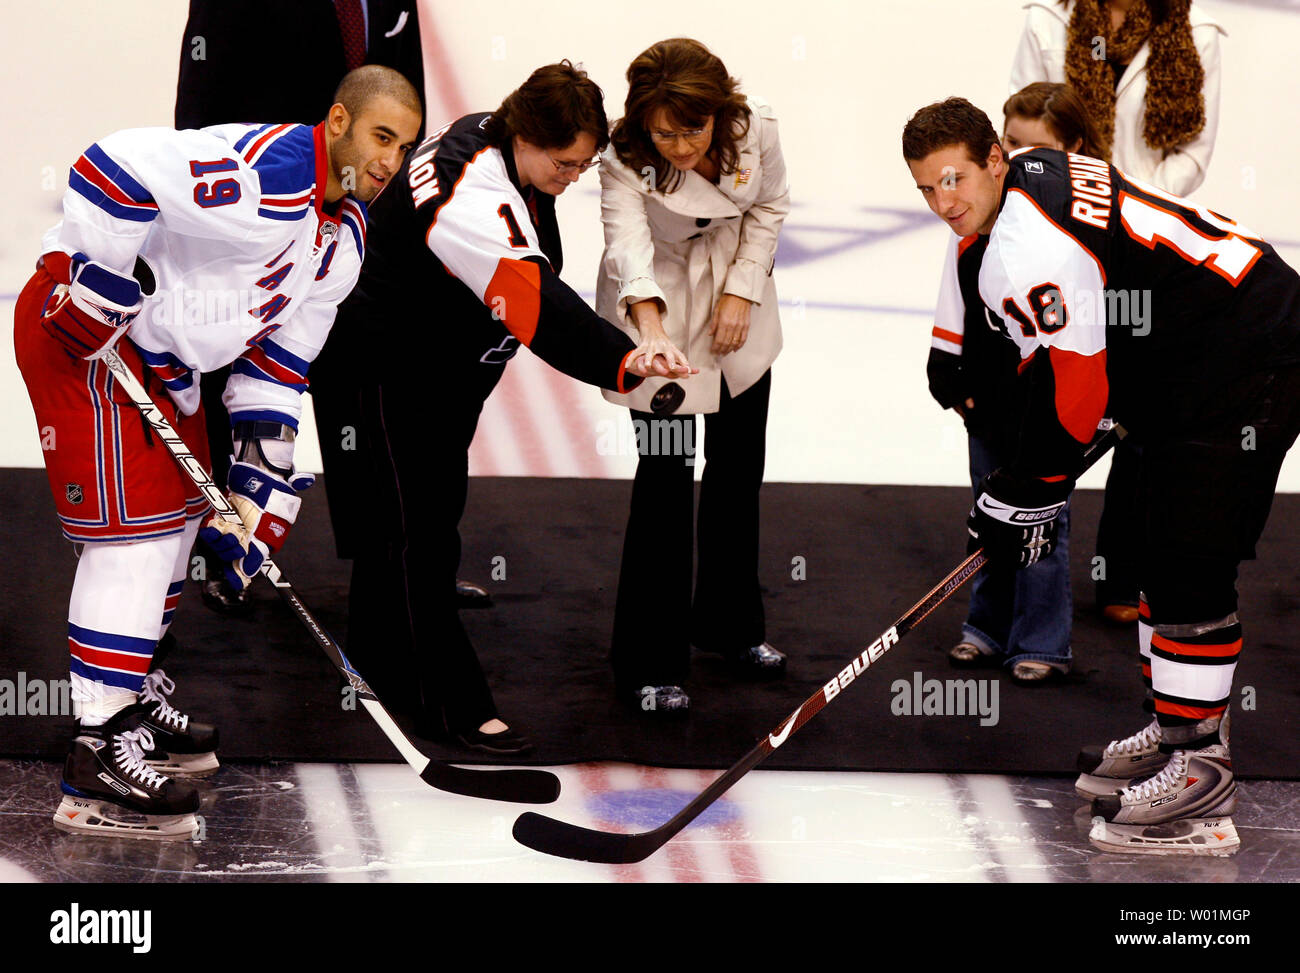 Republican Vice-Presidential candidate Alaska Gov. Sarah Palin drops the official puck before the Philadelphia Flyers home openening game in Philadelphia at the Wachovia Center on October 11, 2008. Helping her is Cathy O'Connell of Erderheim, Pa., selected by the Flyers as their #1 Hockey Mom of the Year. New York Rangers Scott Gomez (19) and Philadelphia Flyers Mike Richards (18).  (UPI Photo/John Anderson) Philadelphia Stock Photo